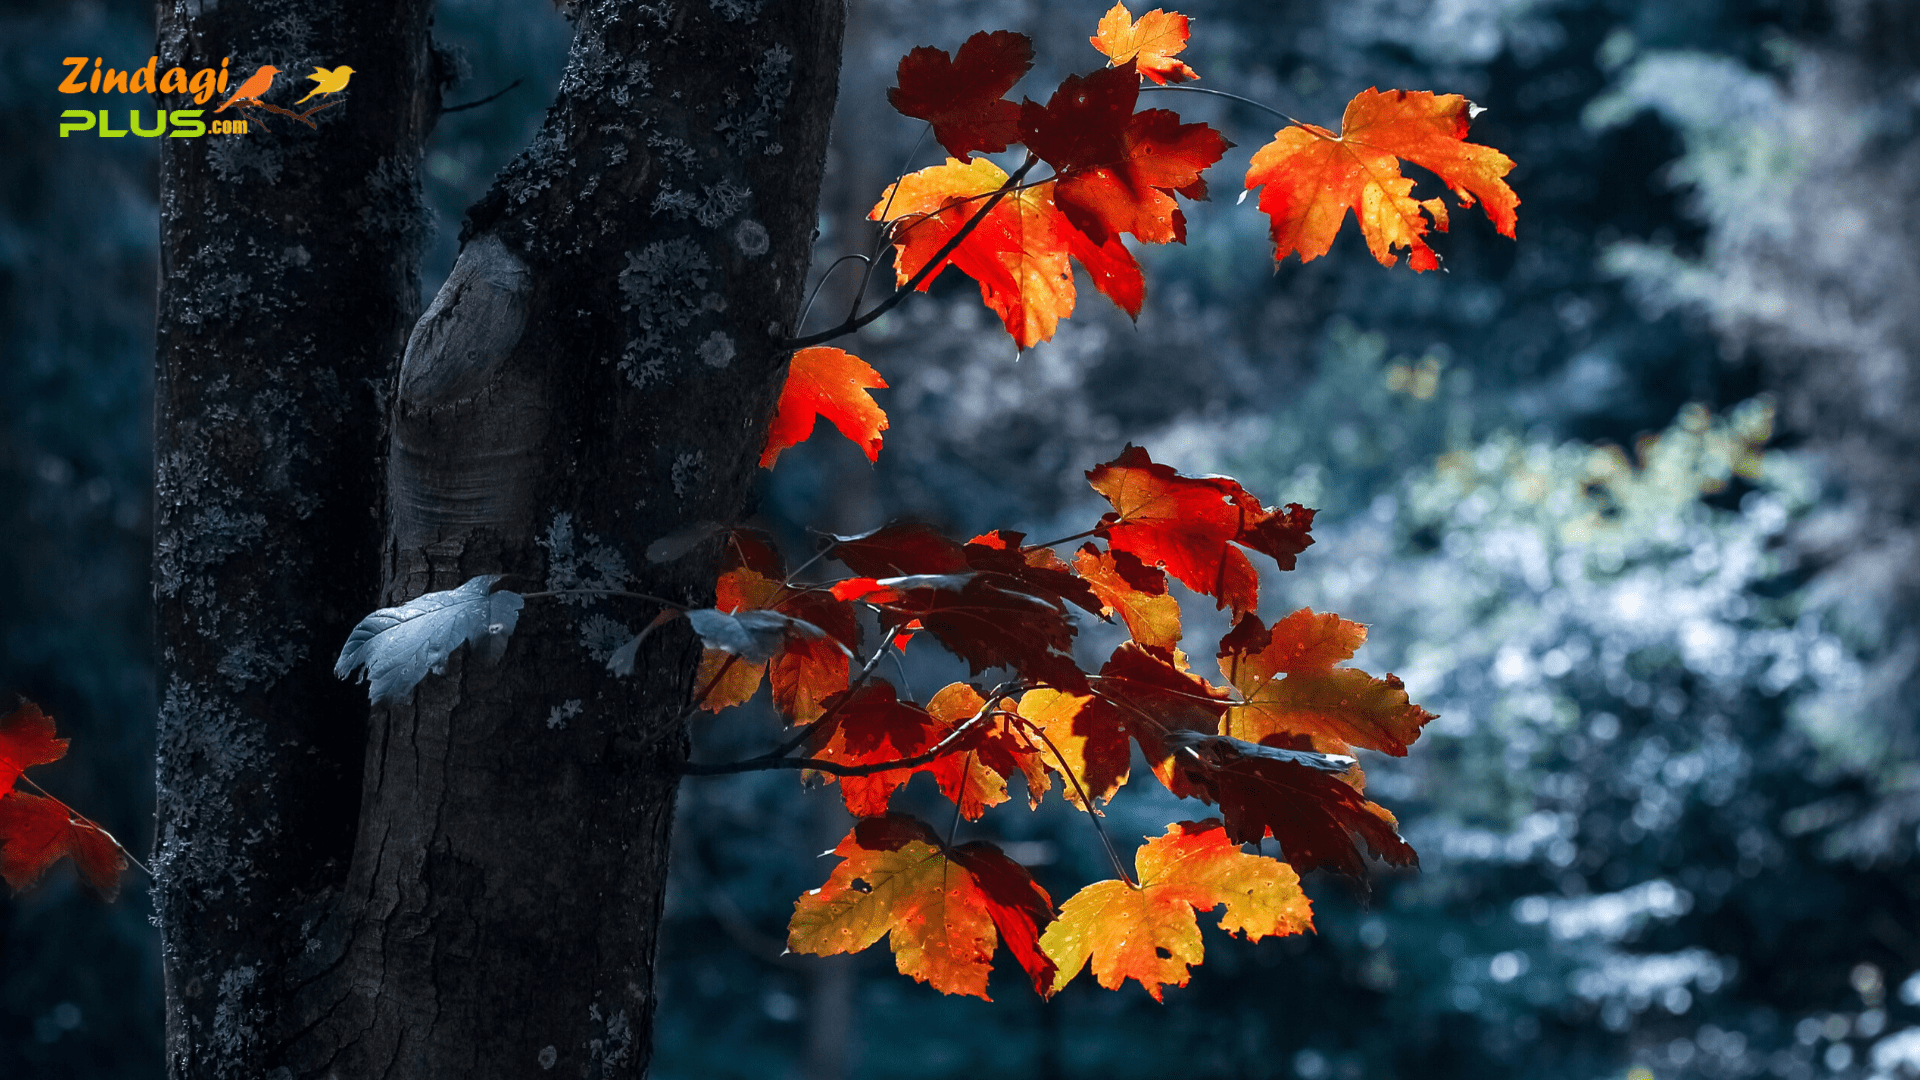 Best Nature Wallpapers Hd Free Download - Autumn Exists To Remind Us - HD Wallpaper 